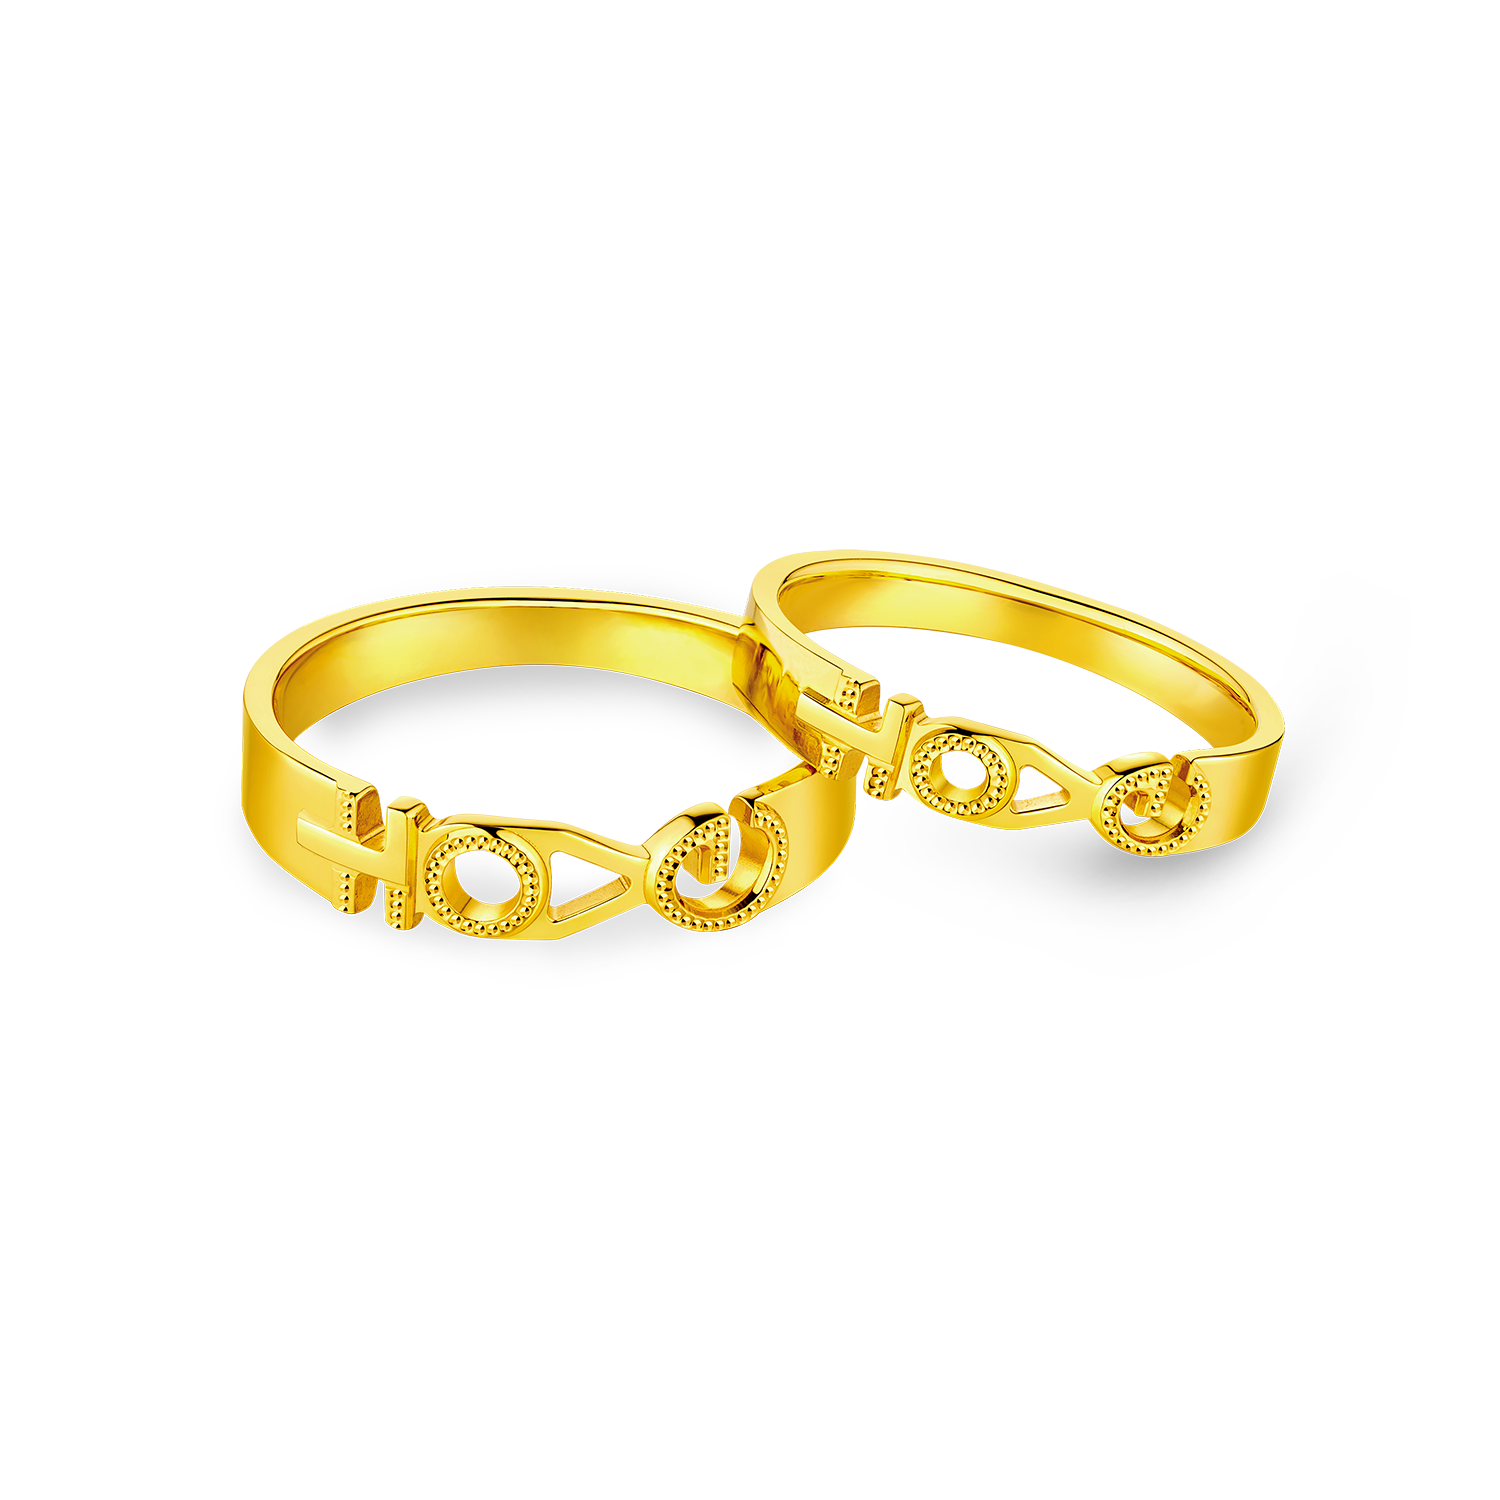 Goldstyle•X "Moment of Love and Bliss" Gold Diamond Wedding Rings